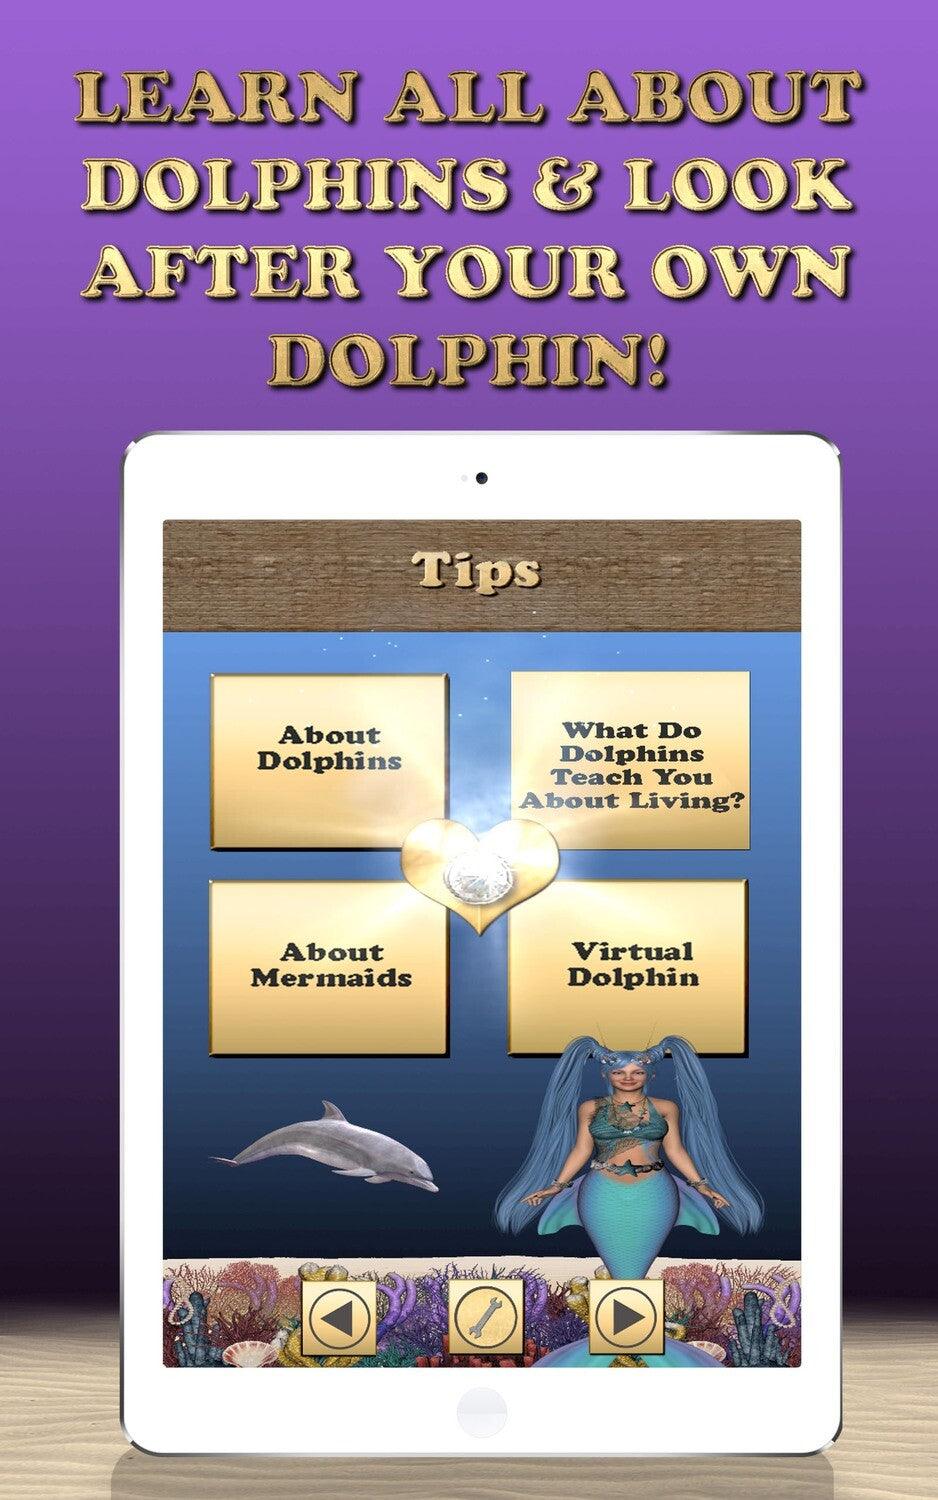 More Than Charms Where's The Dolphin? App